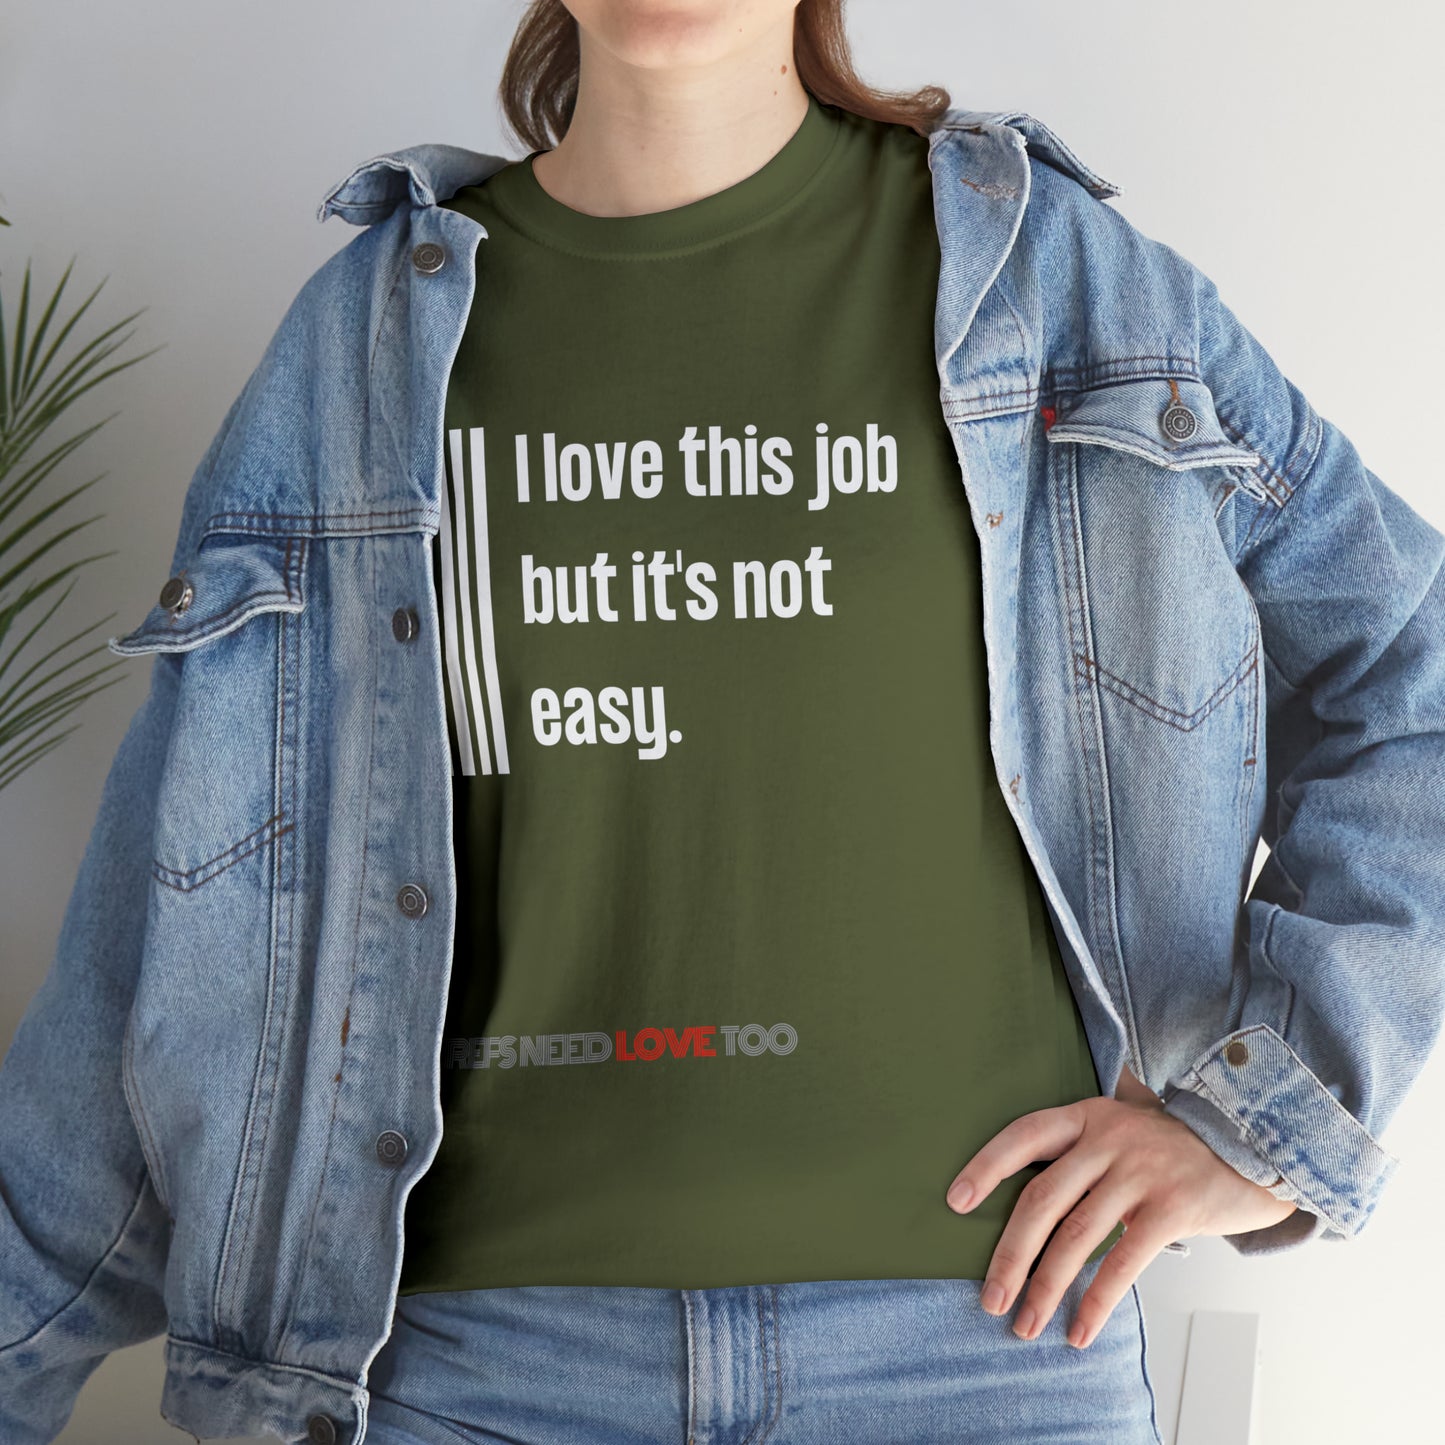 I Love This Job Unisex Cotton Tee | Gifts for Refs | For Sports Officials | Tough Job Shirt | Screen print t shirt | Refs Need Love Too